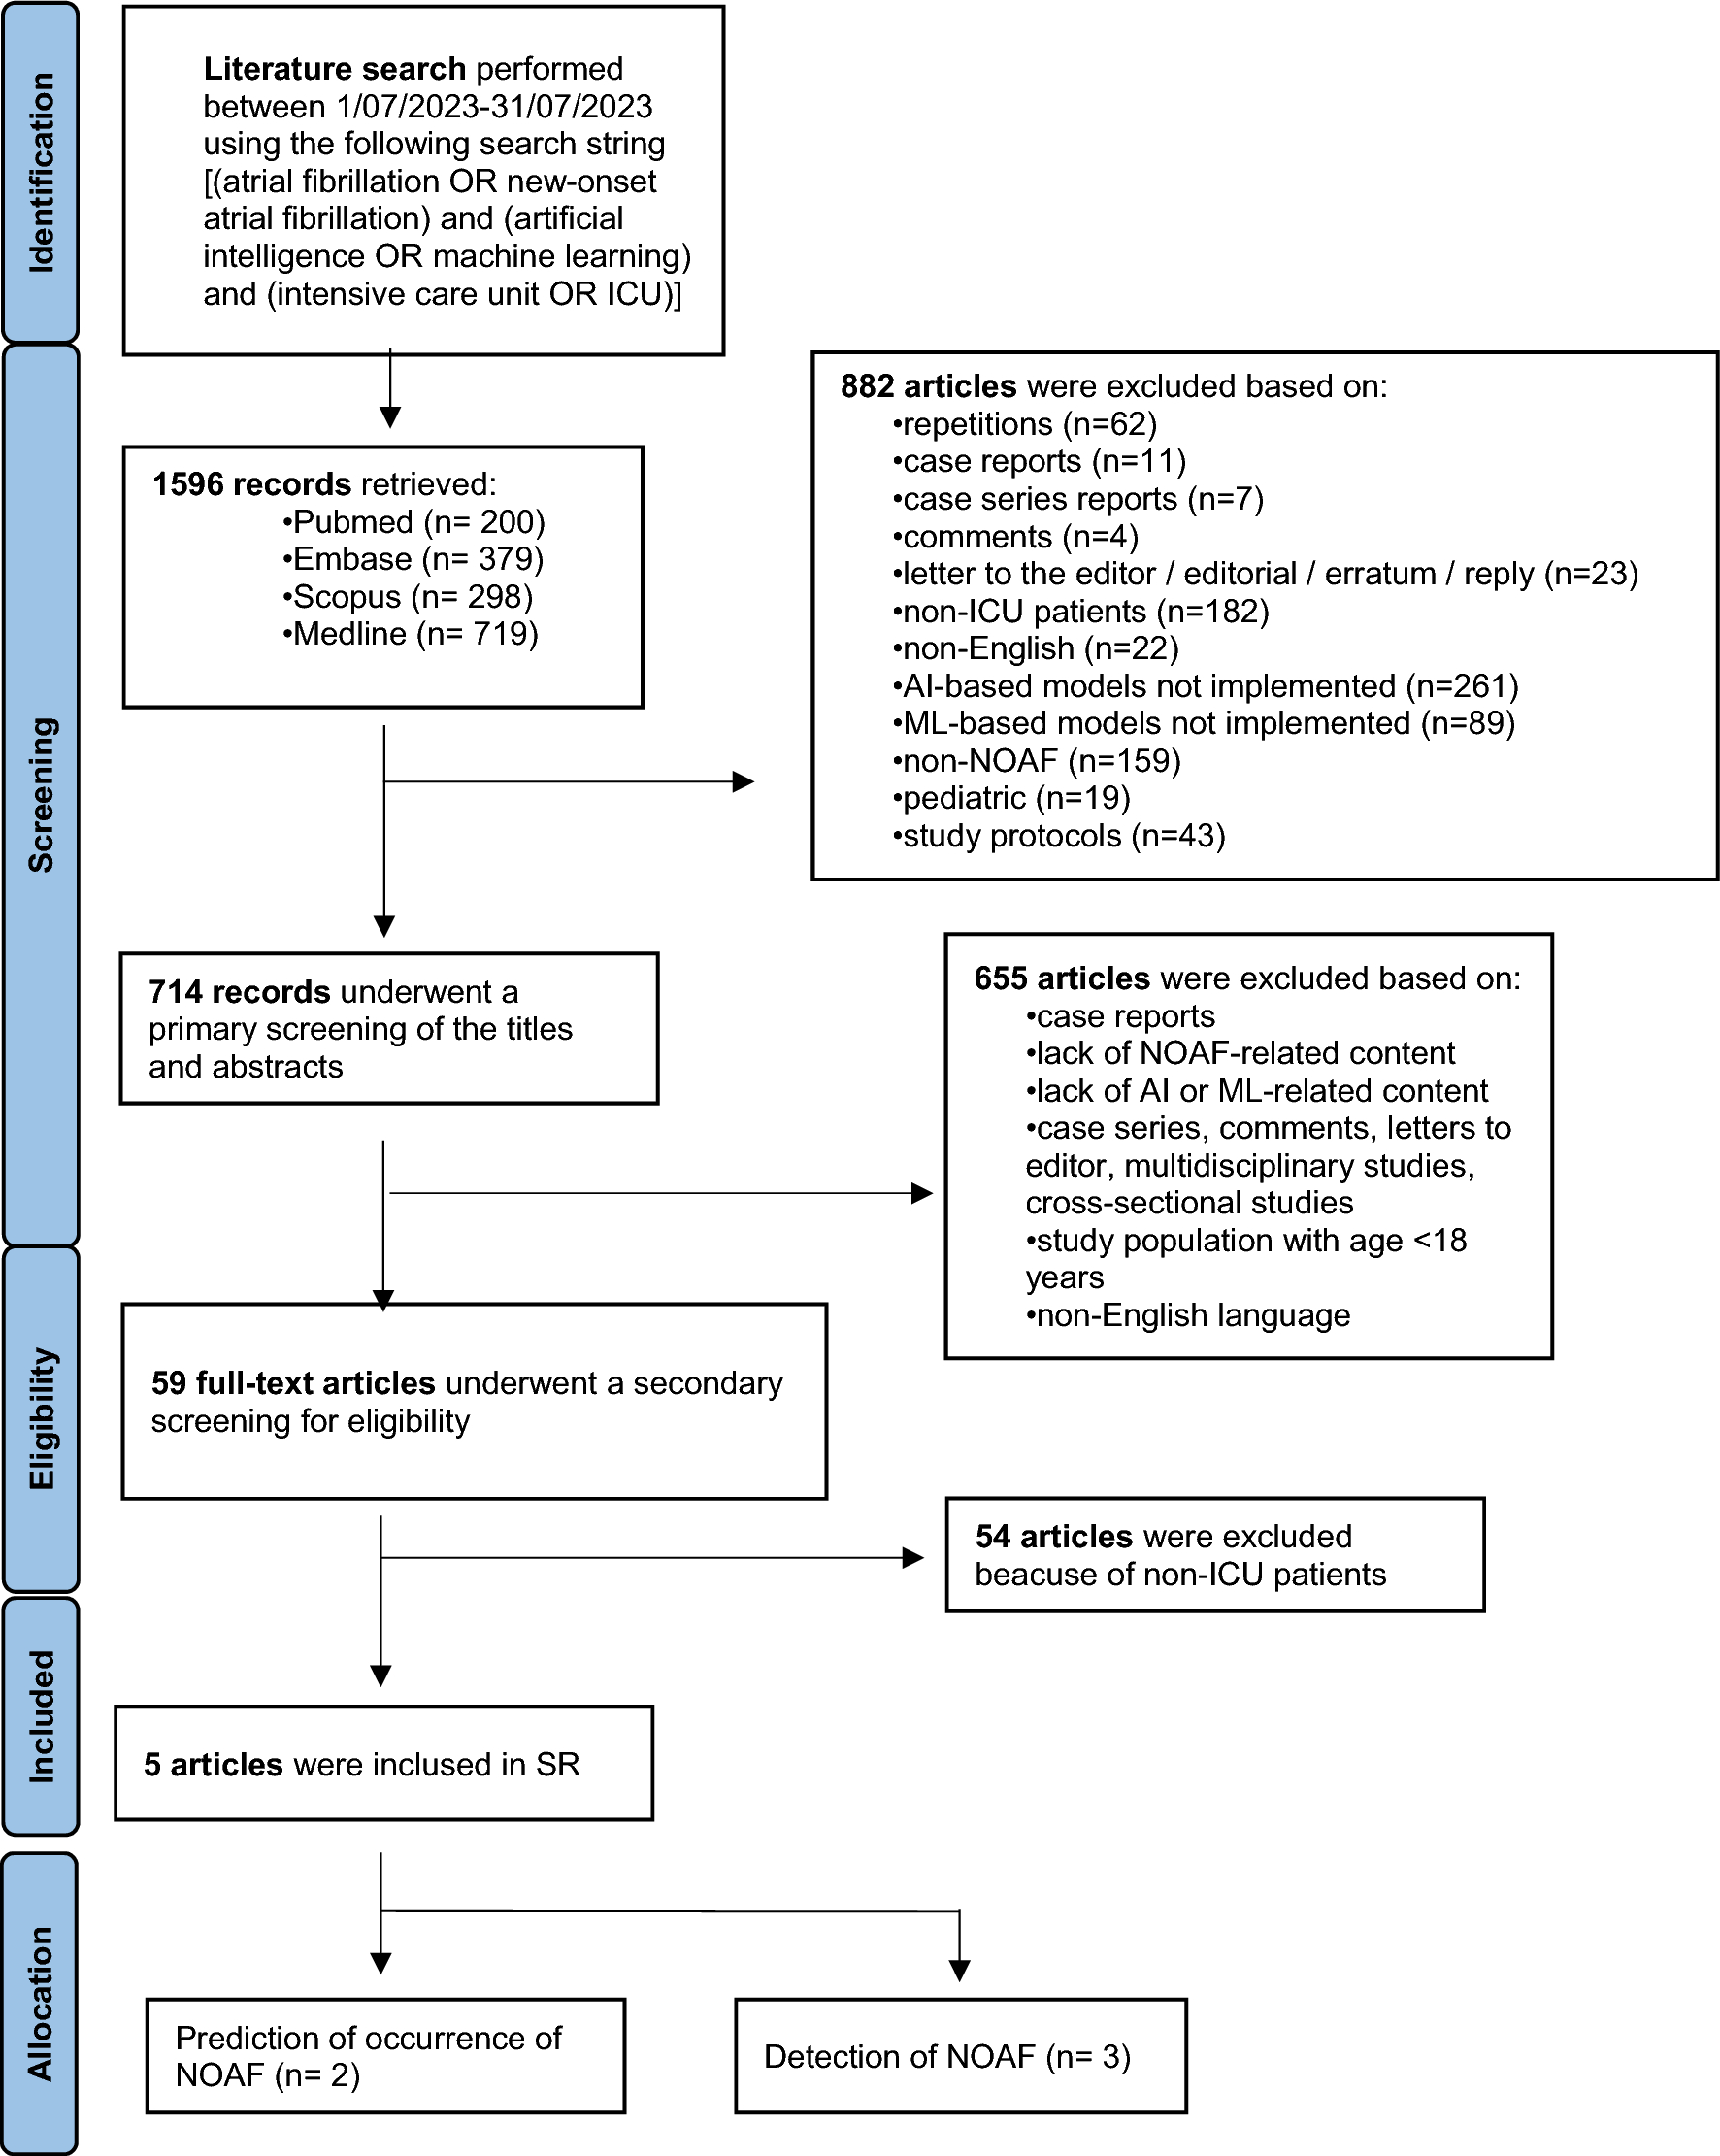 Machine learning in the prediction and detection of new-onset atrial fibrillation in ICU: a systematic review